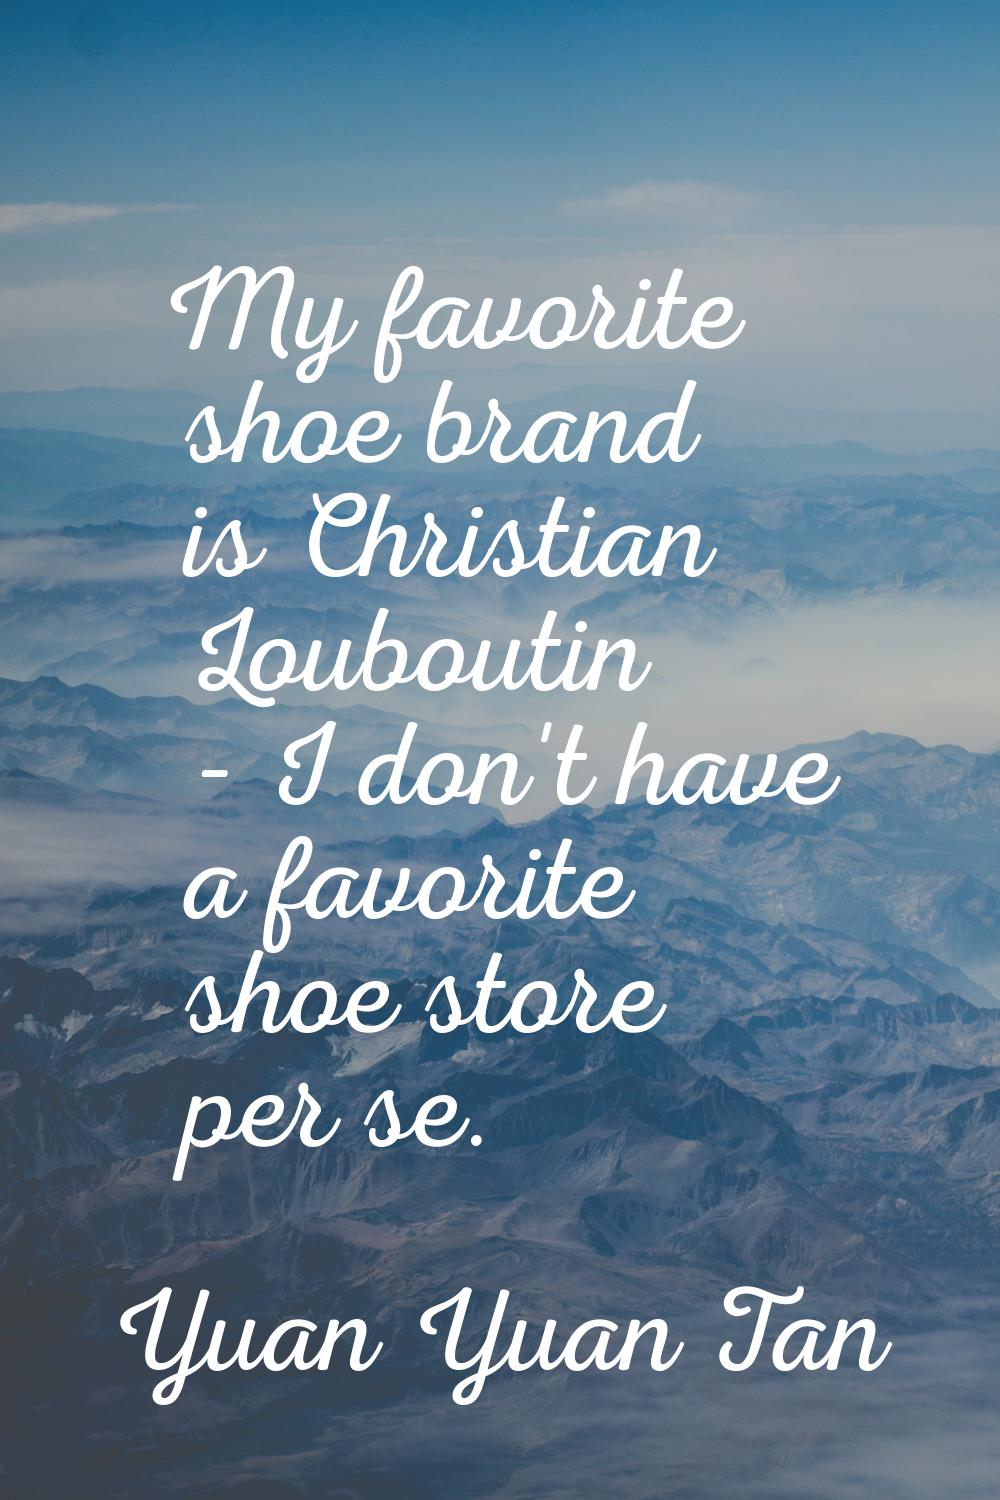 My favorite shoe brand is Christian Louboutin - I don't have a favorite shoe store per se.